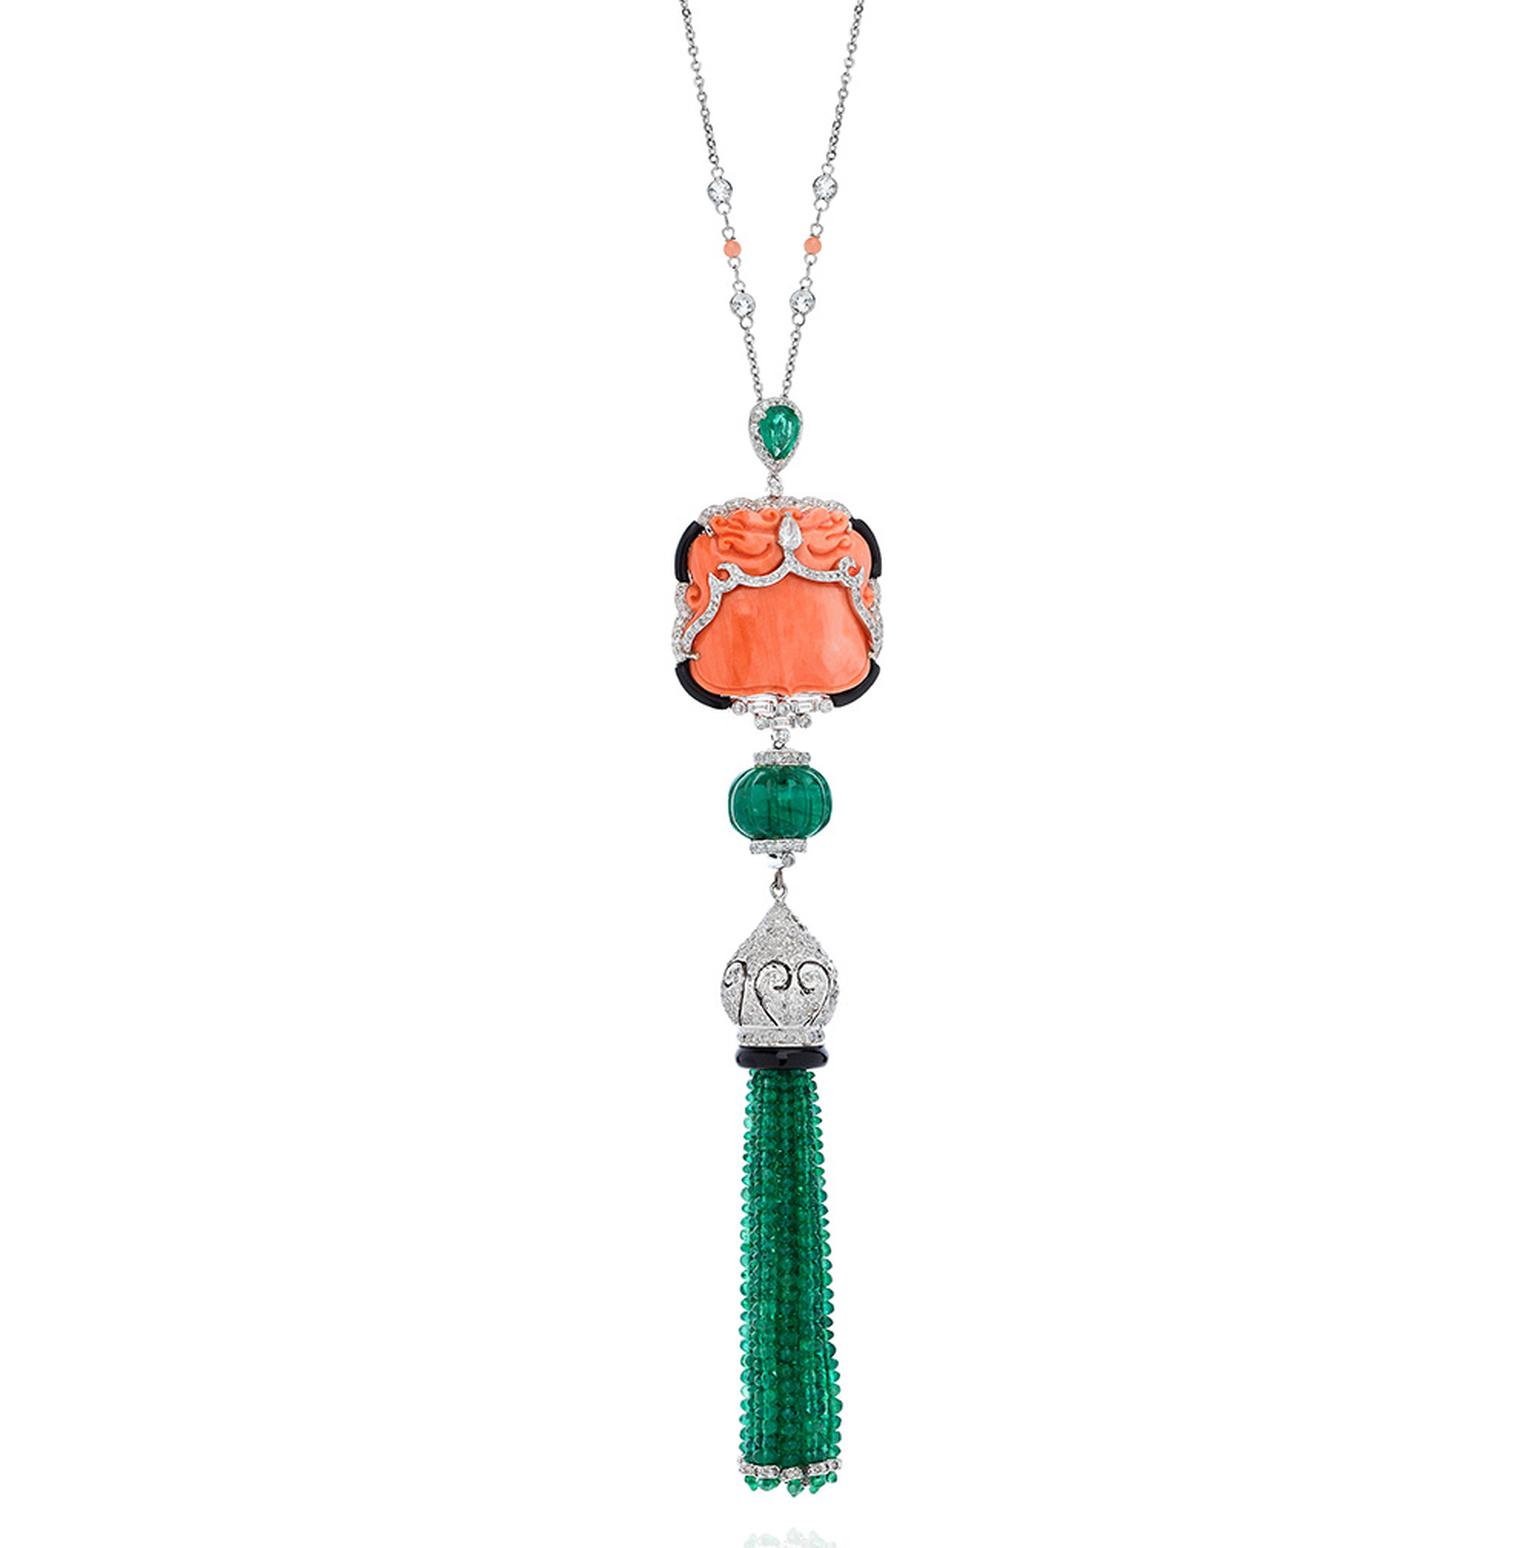 White gold, emerald, coral and diamond tassel necklace by Nigaam at Talisman Gallery, Harvey Nichols, London